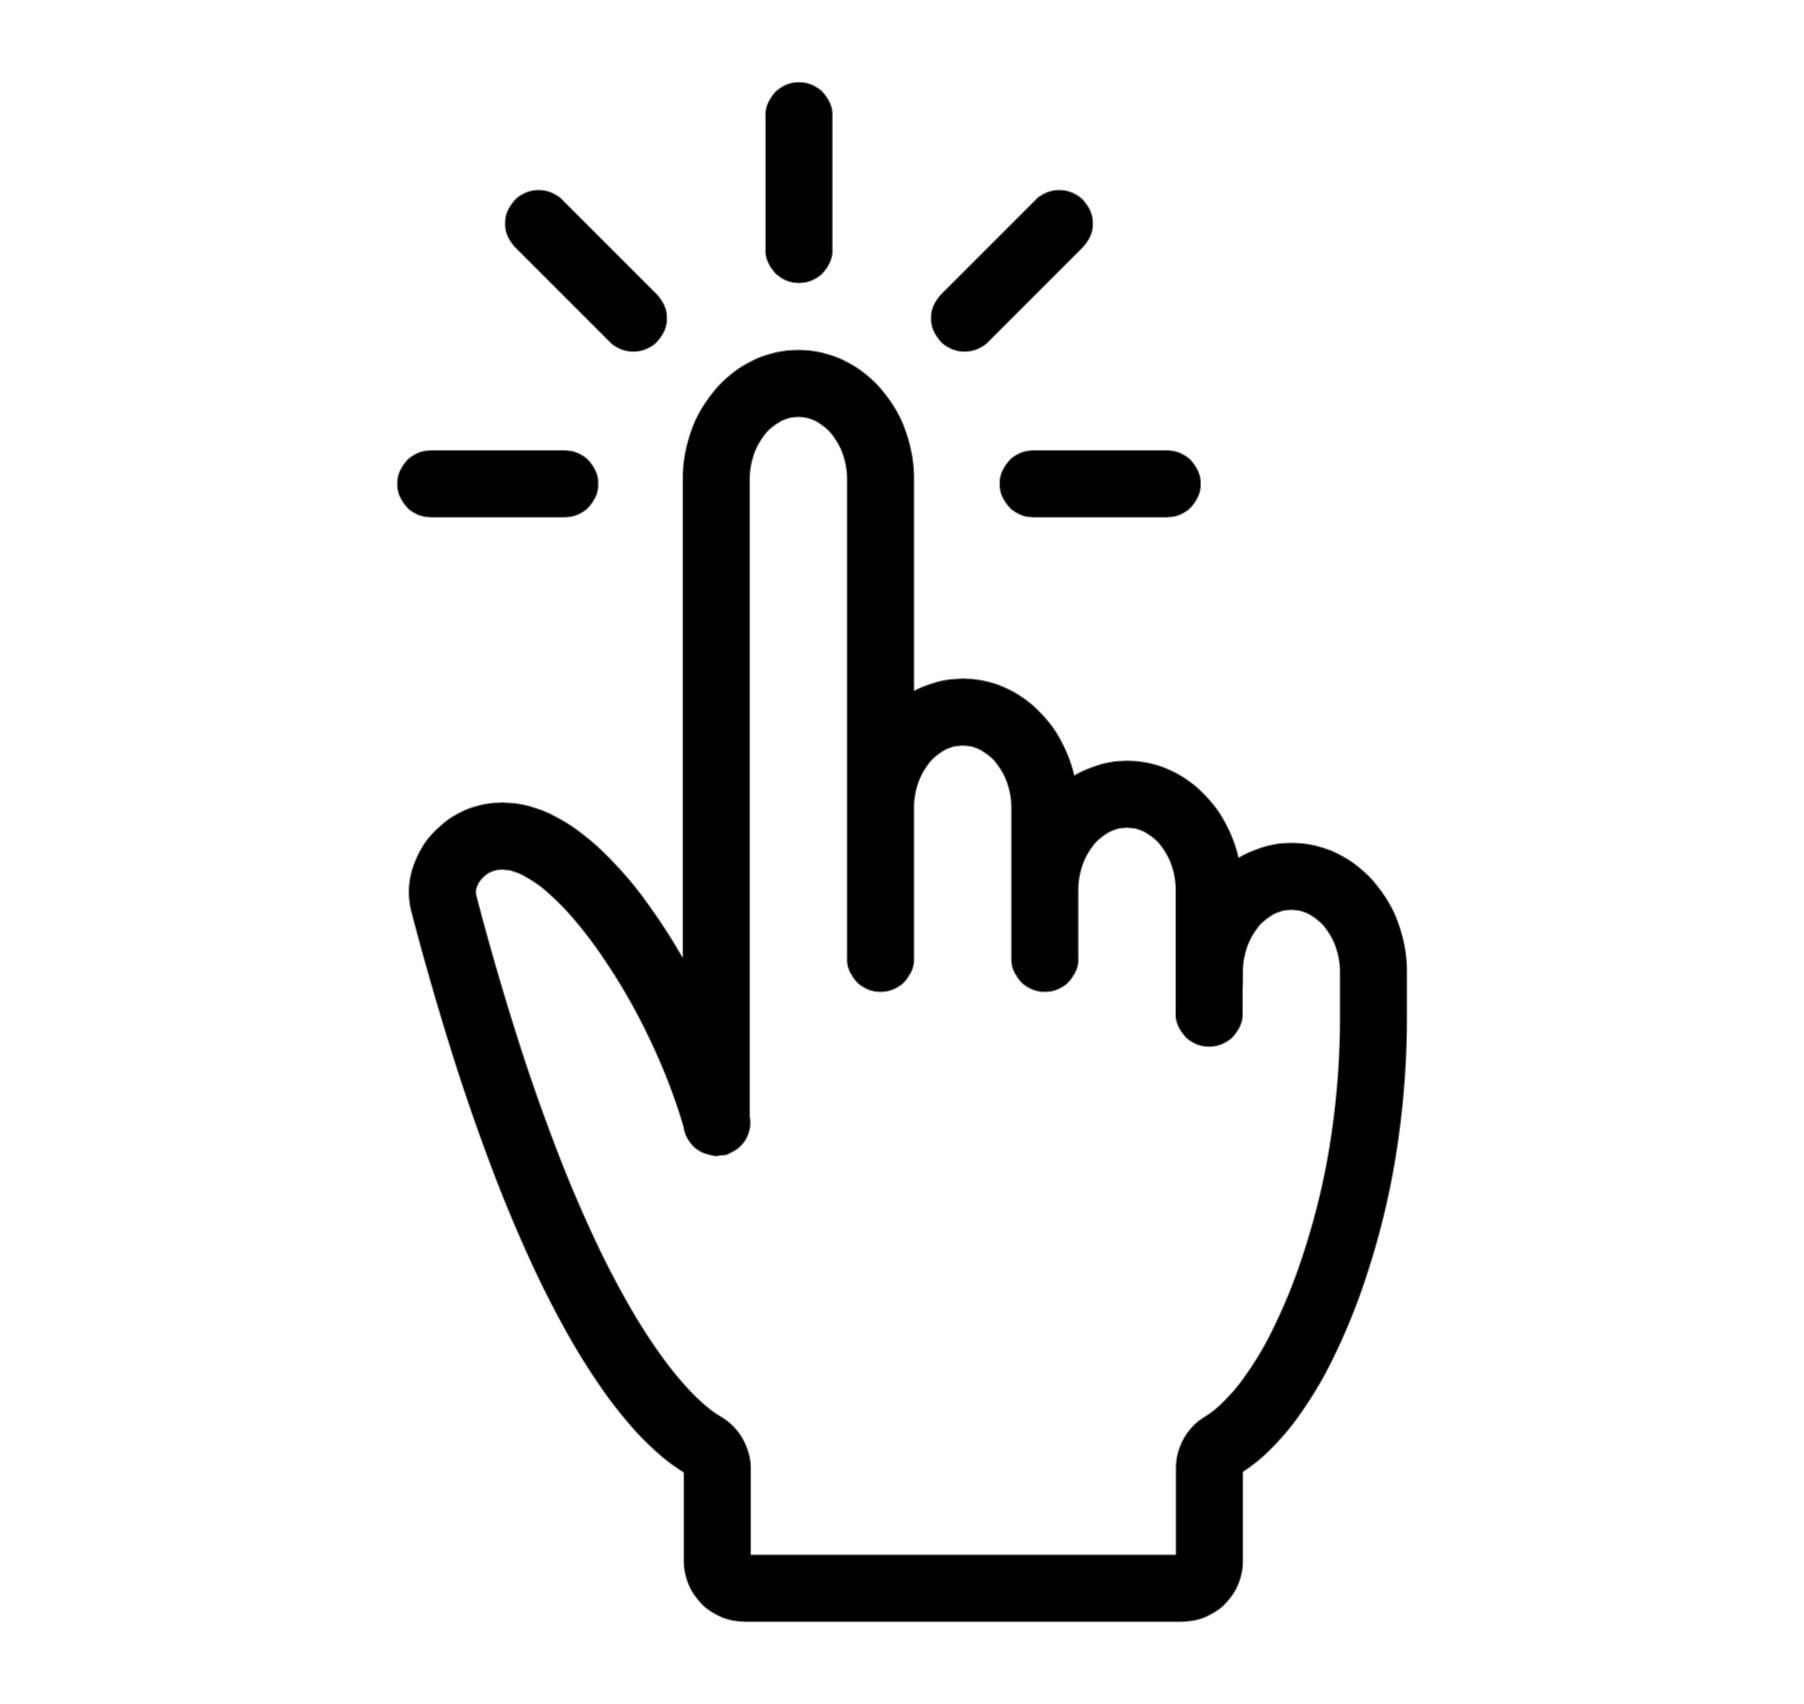 Pointing finger icon